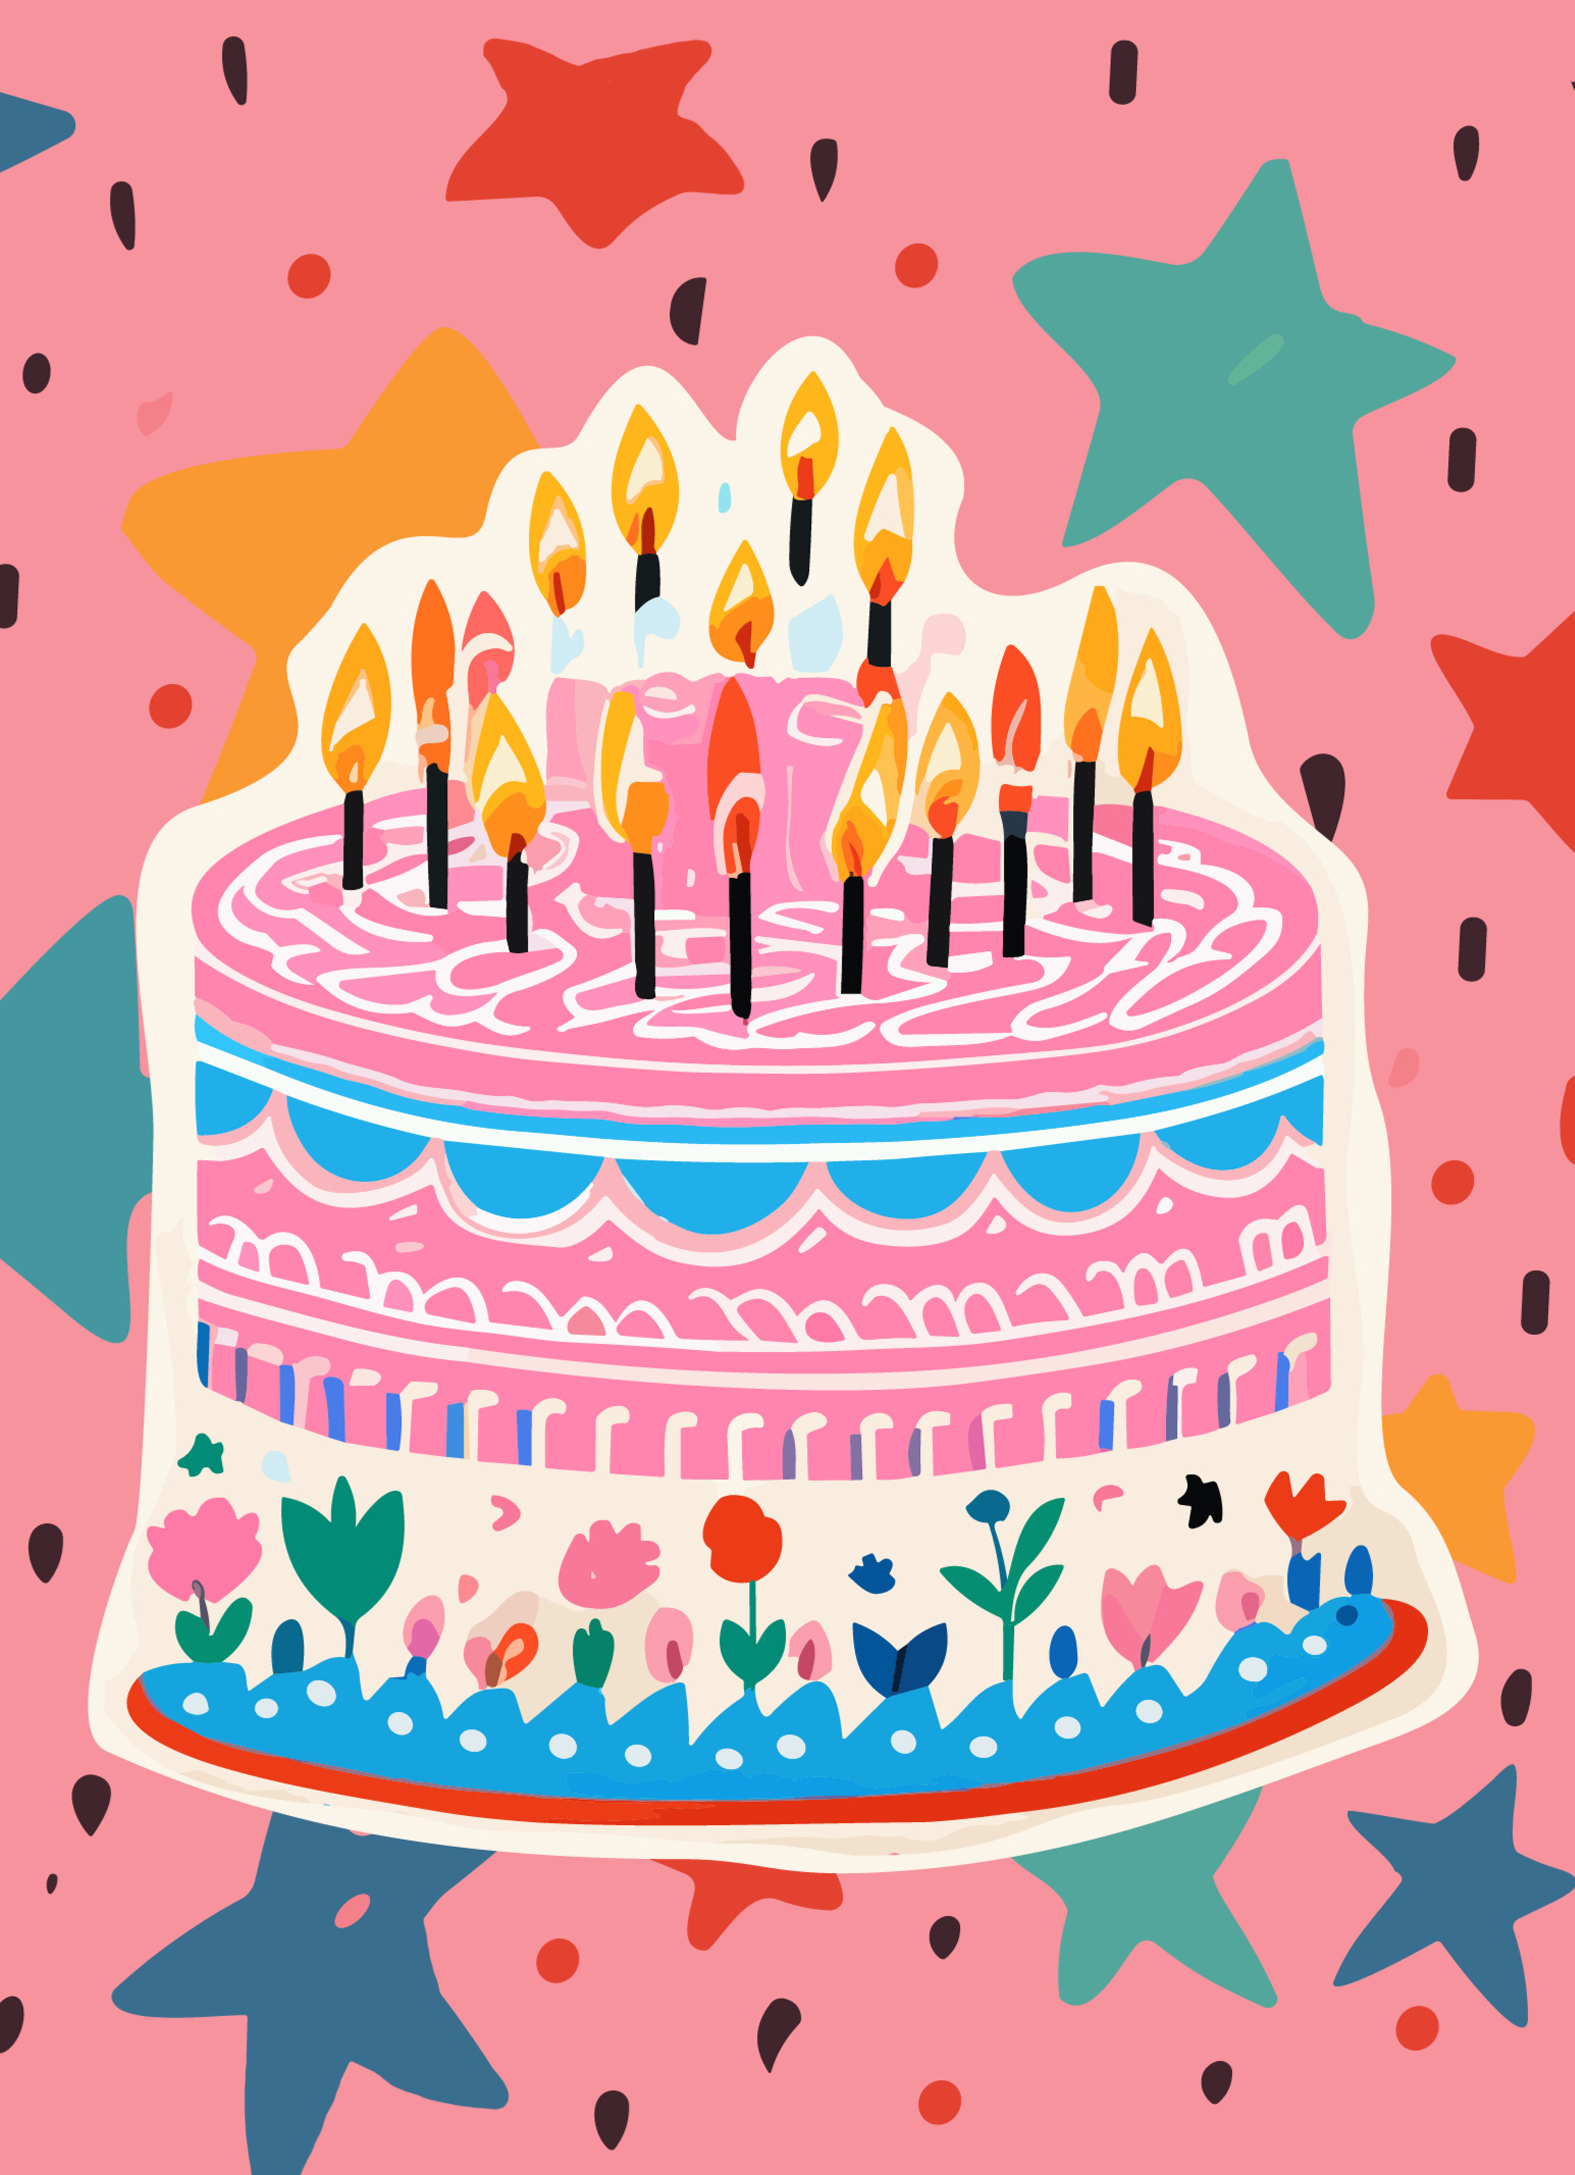 Happiest Birthday Cake  Card Cover